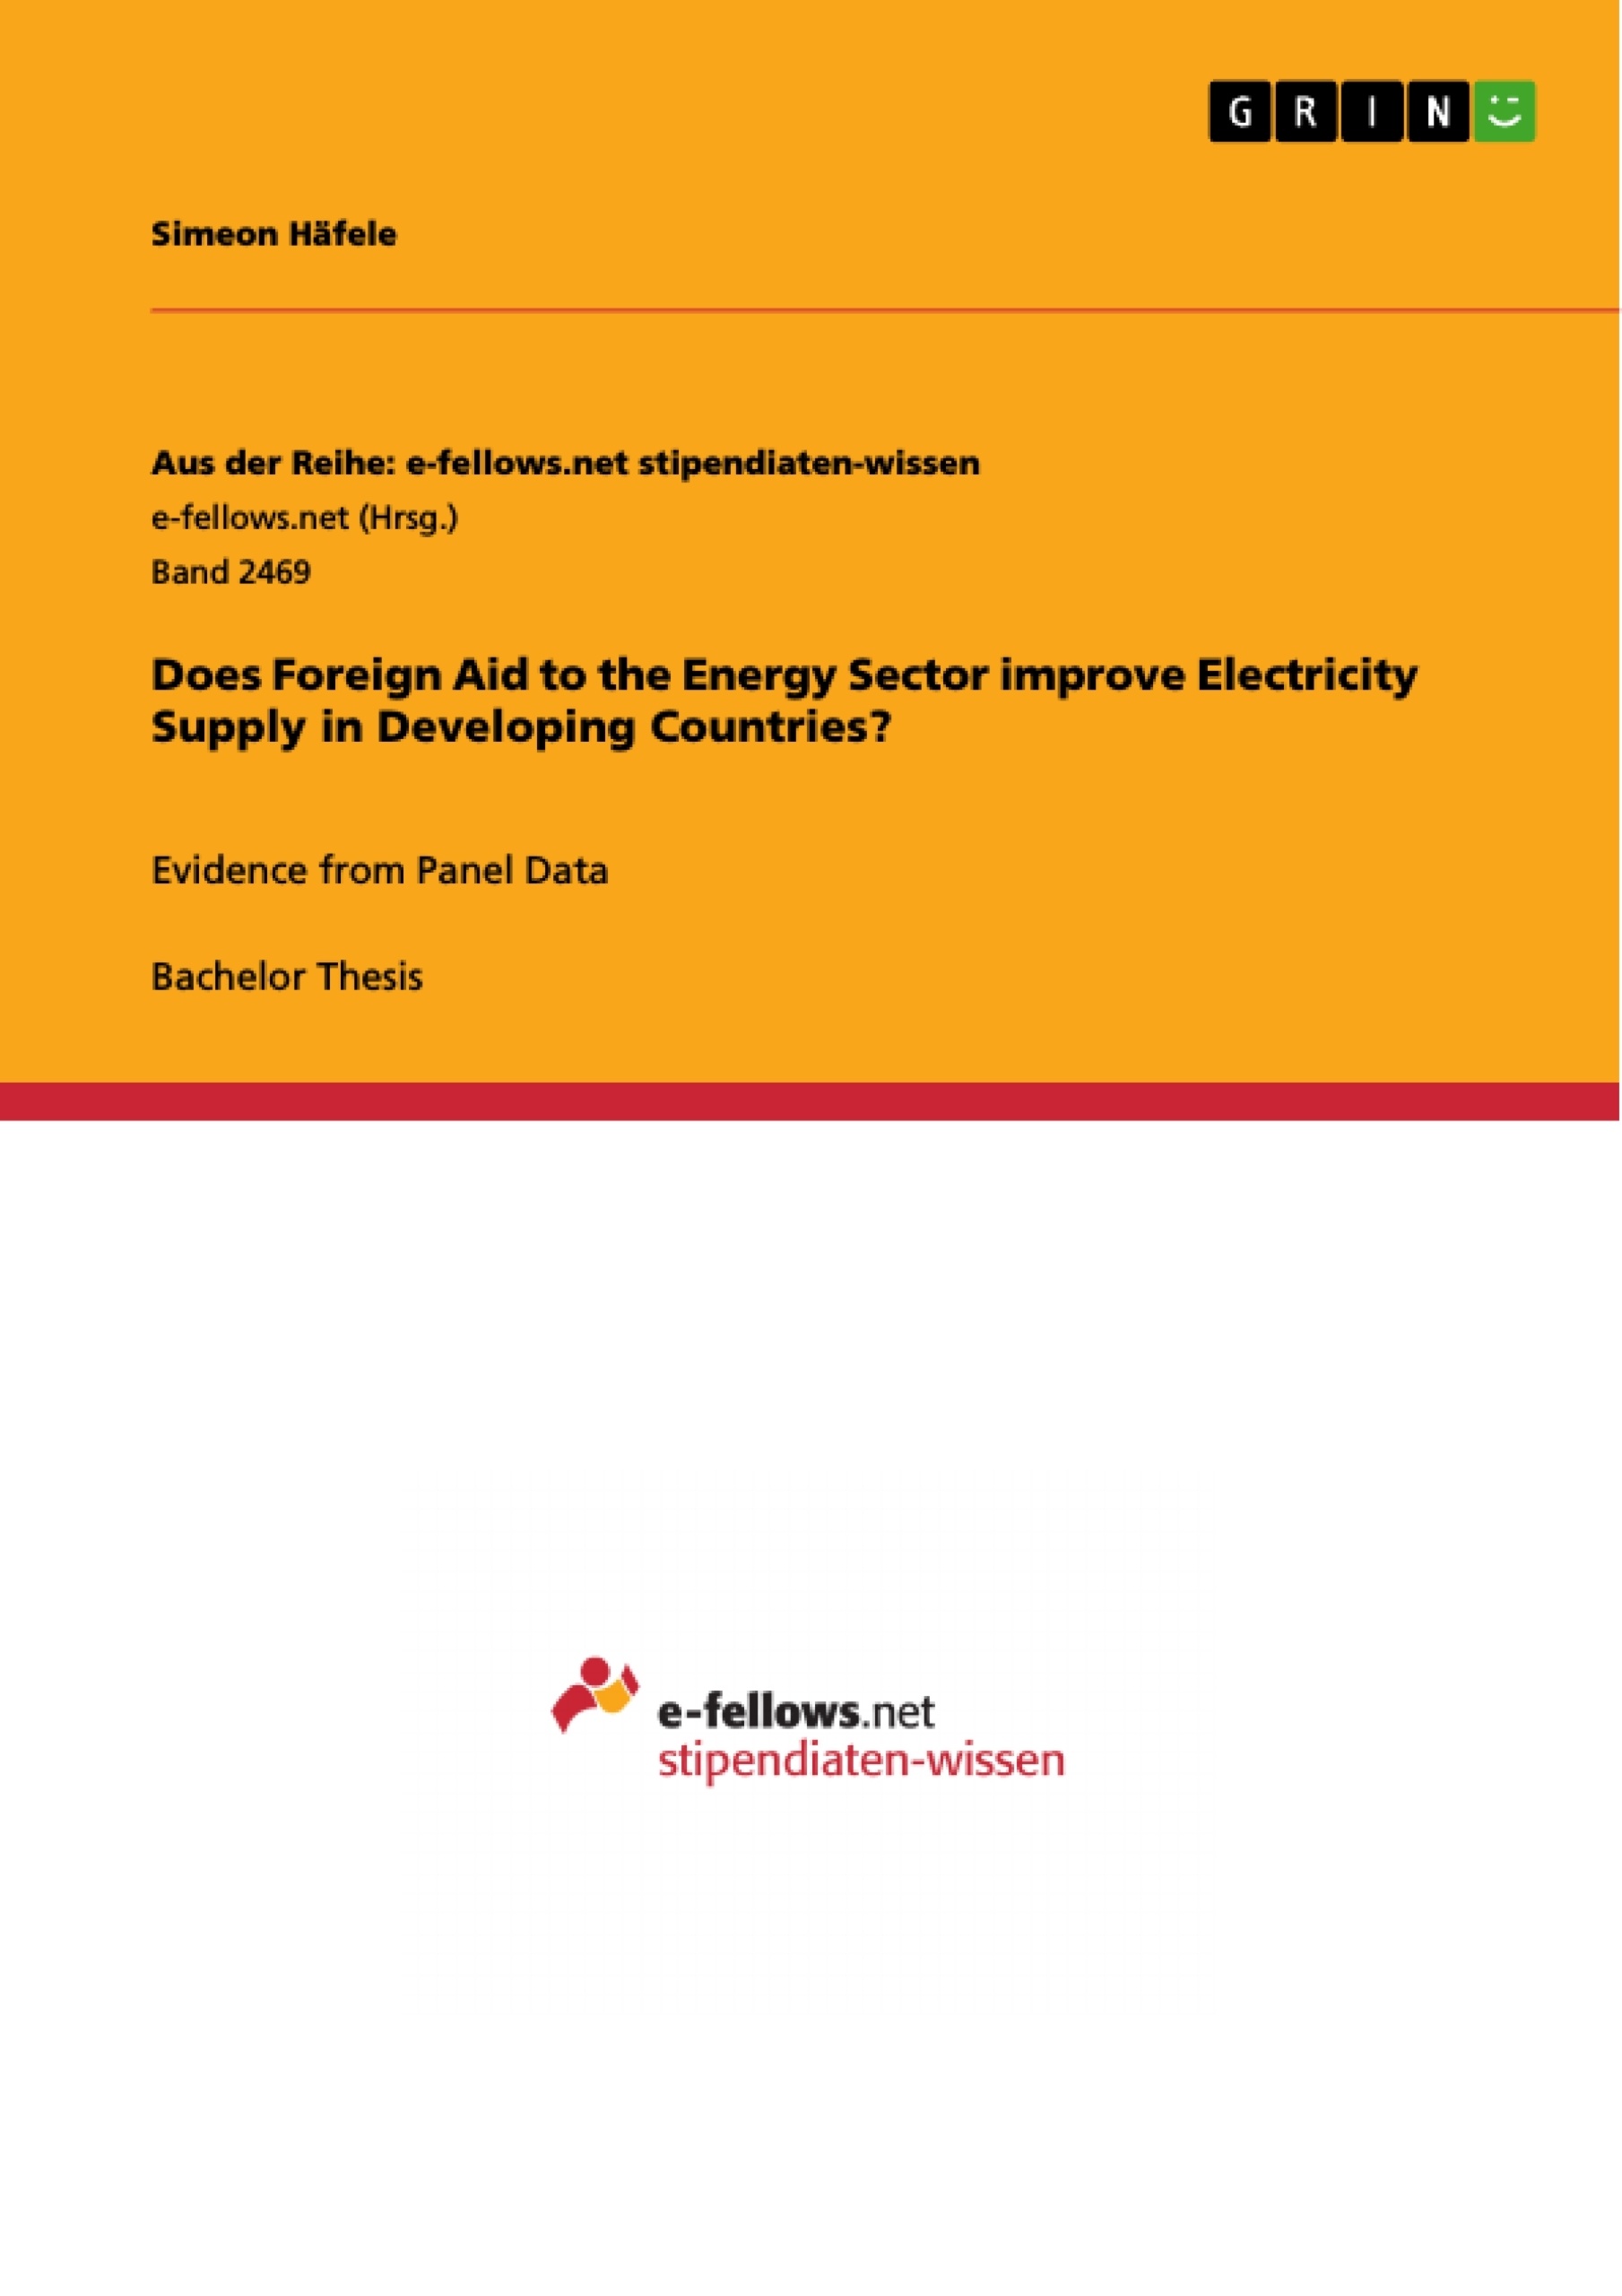 Title: Does Foreign Aid to the Energy Sector improve Electricity Supply in Developing Countries?